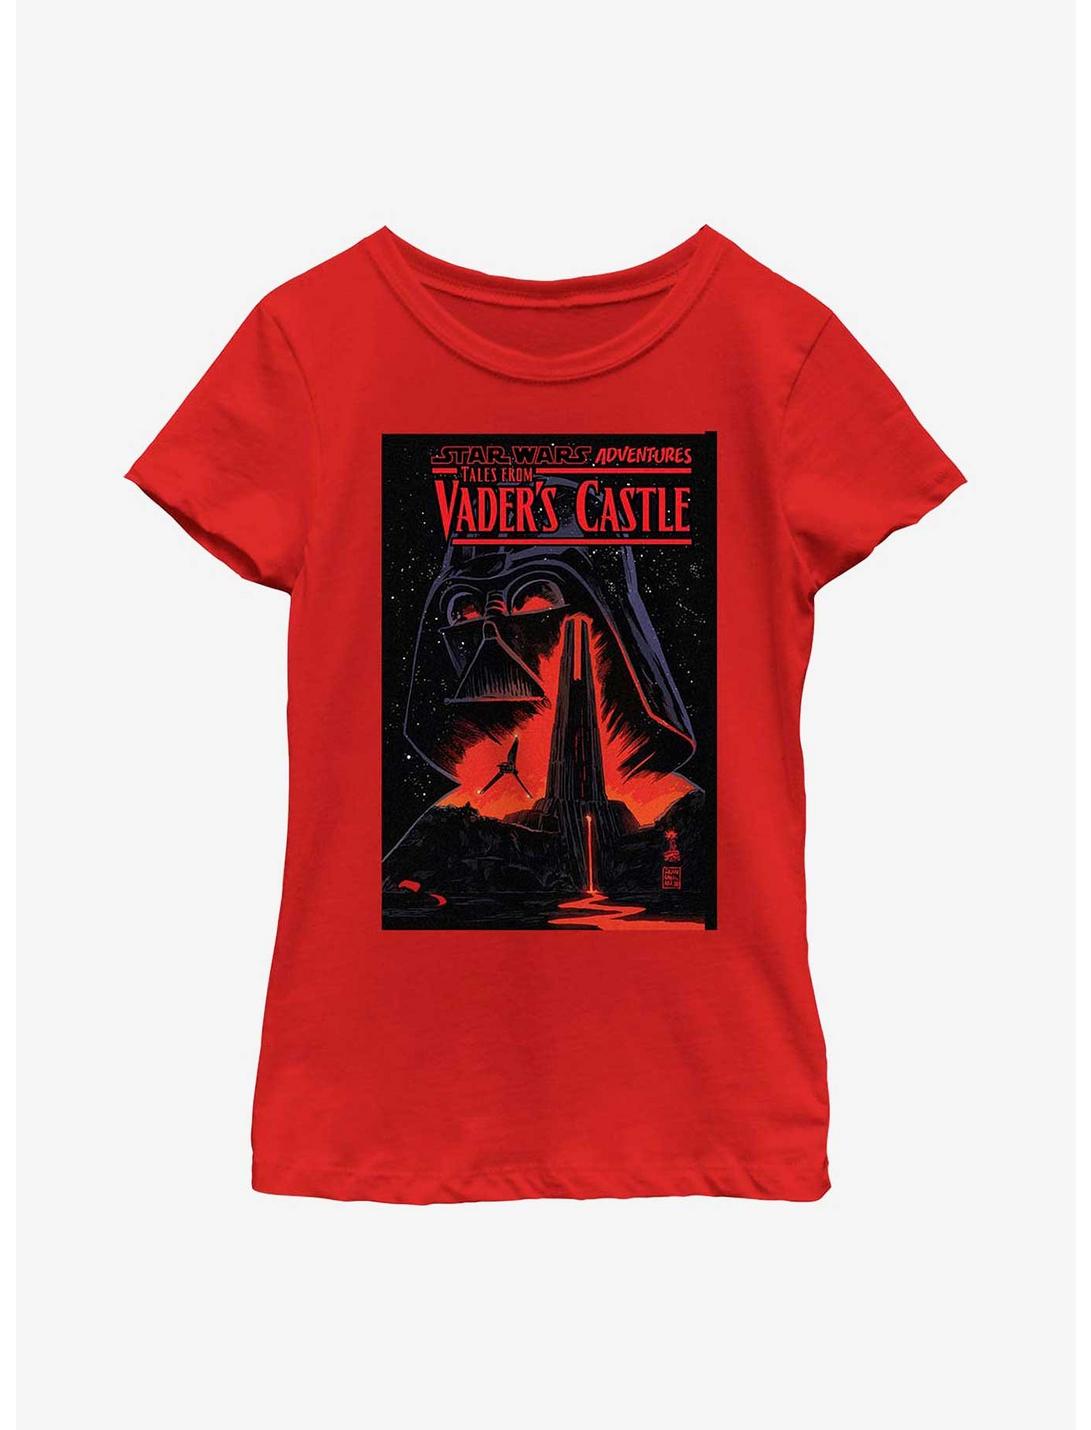 Star Wars Vader Tales From Vader's Castle Youth Girls T-Shirt, RED, hi-res